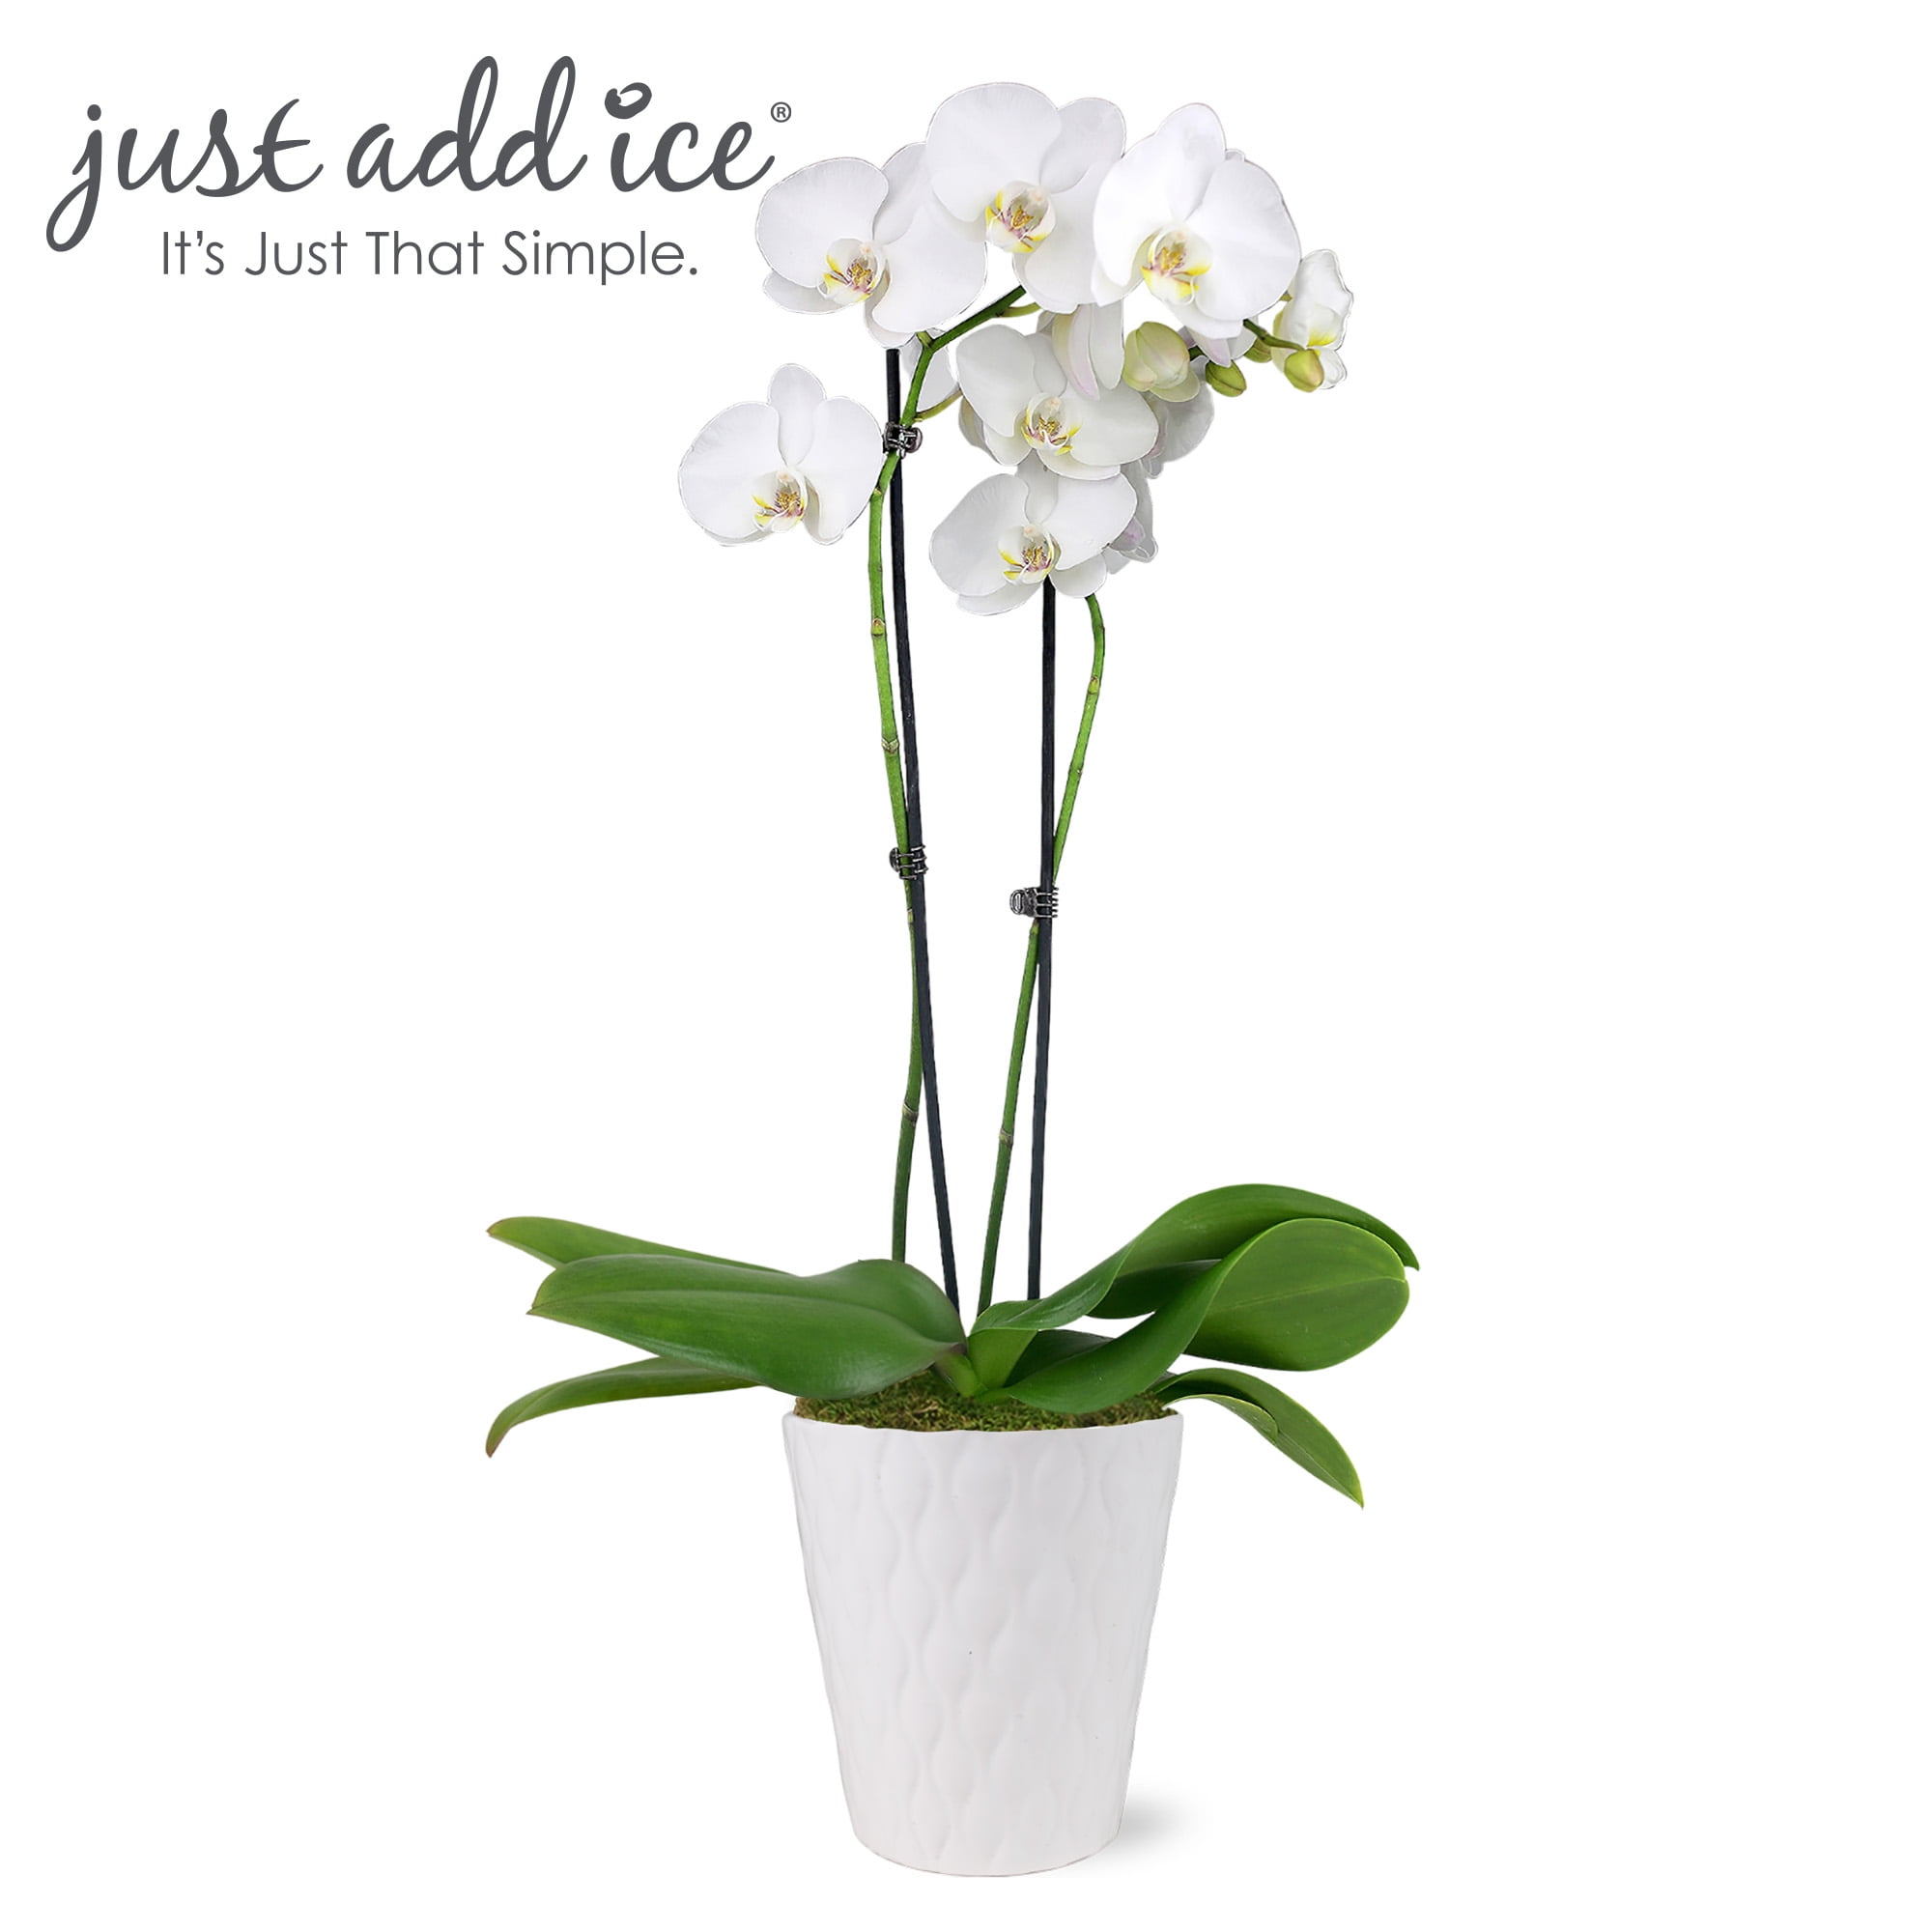 Just Add Ice 16-30" White and Yellow Premium Orchid Live Plant in 5" White Ceramic Pot, House Plant